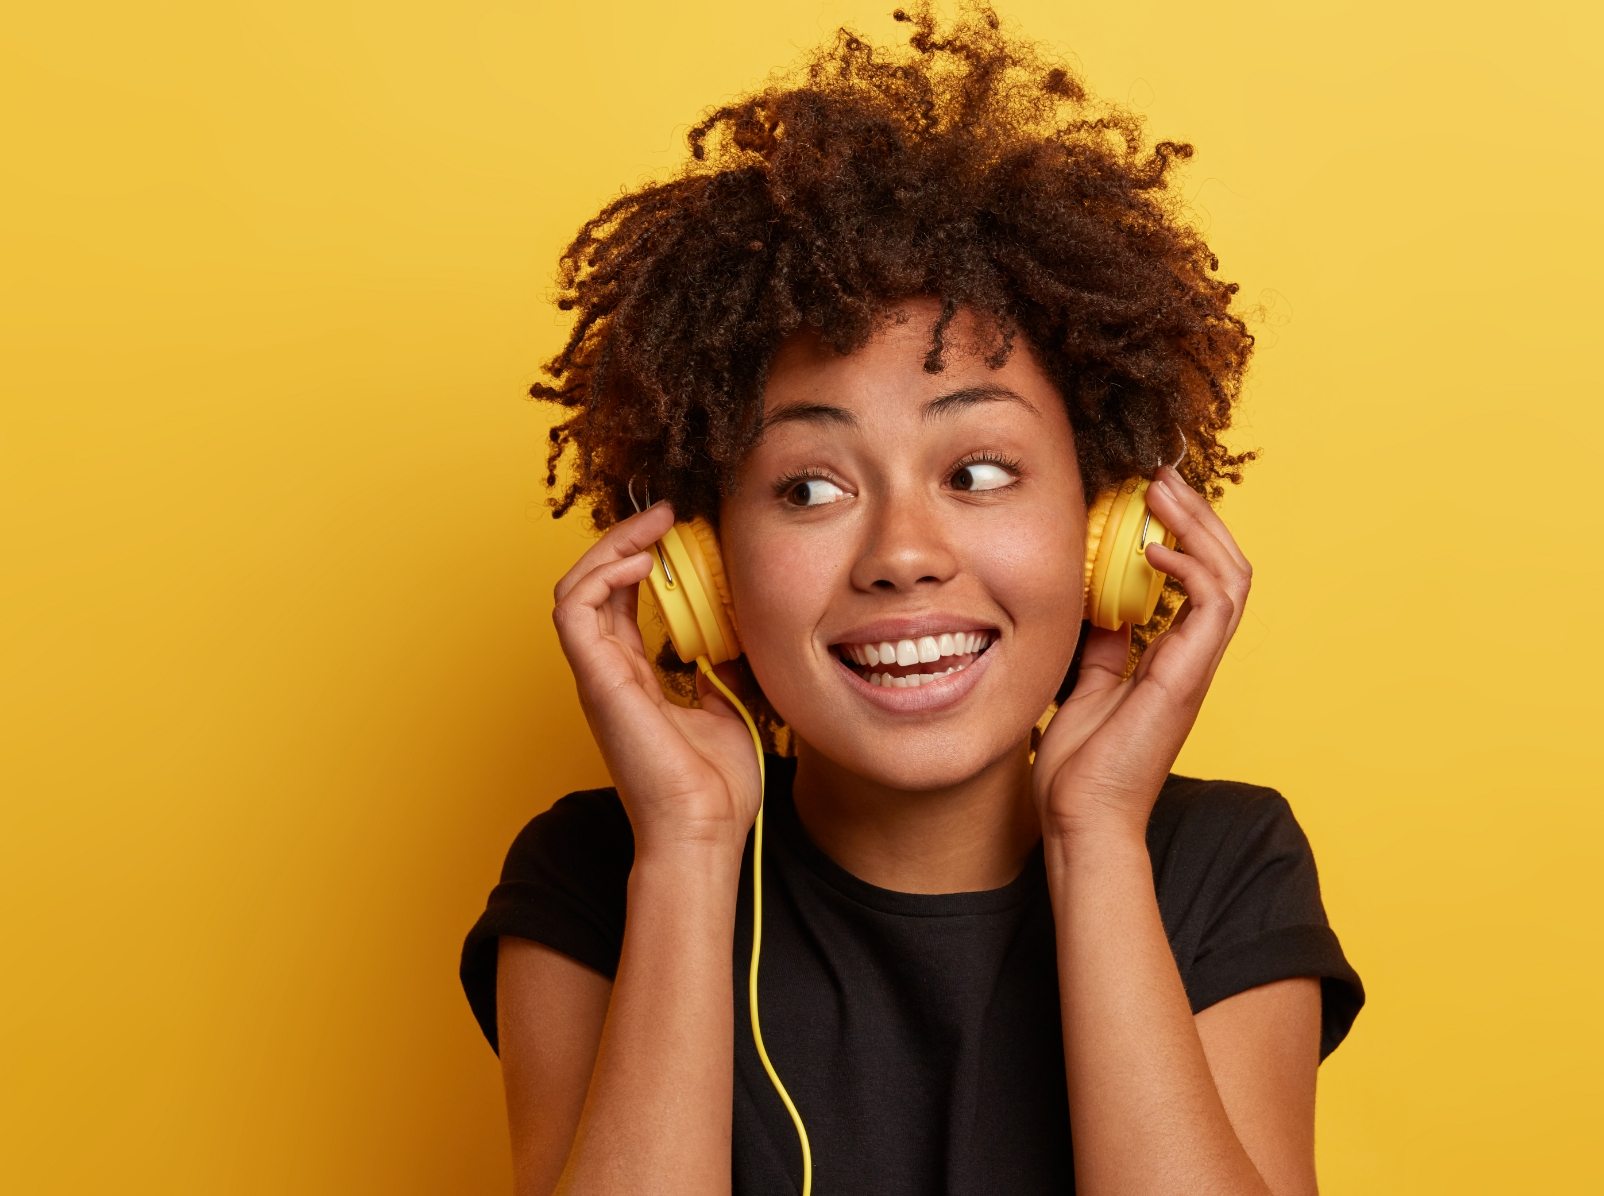 demo-attachment-36-happy-dark-skinned-woman-wears-wired-headphones-enjoys-nice-music-looks-away-has-toothy-smile